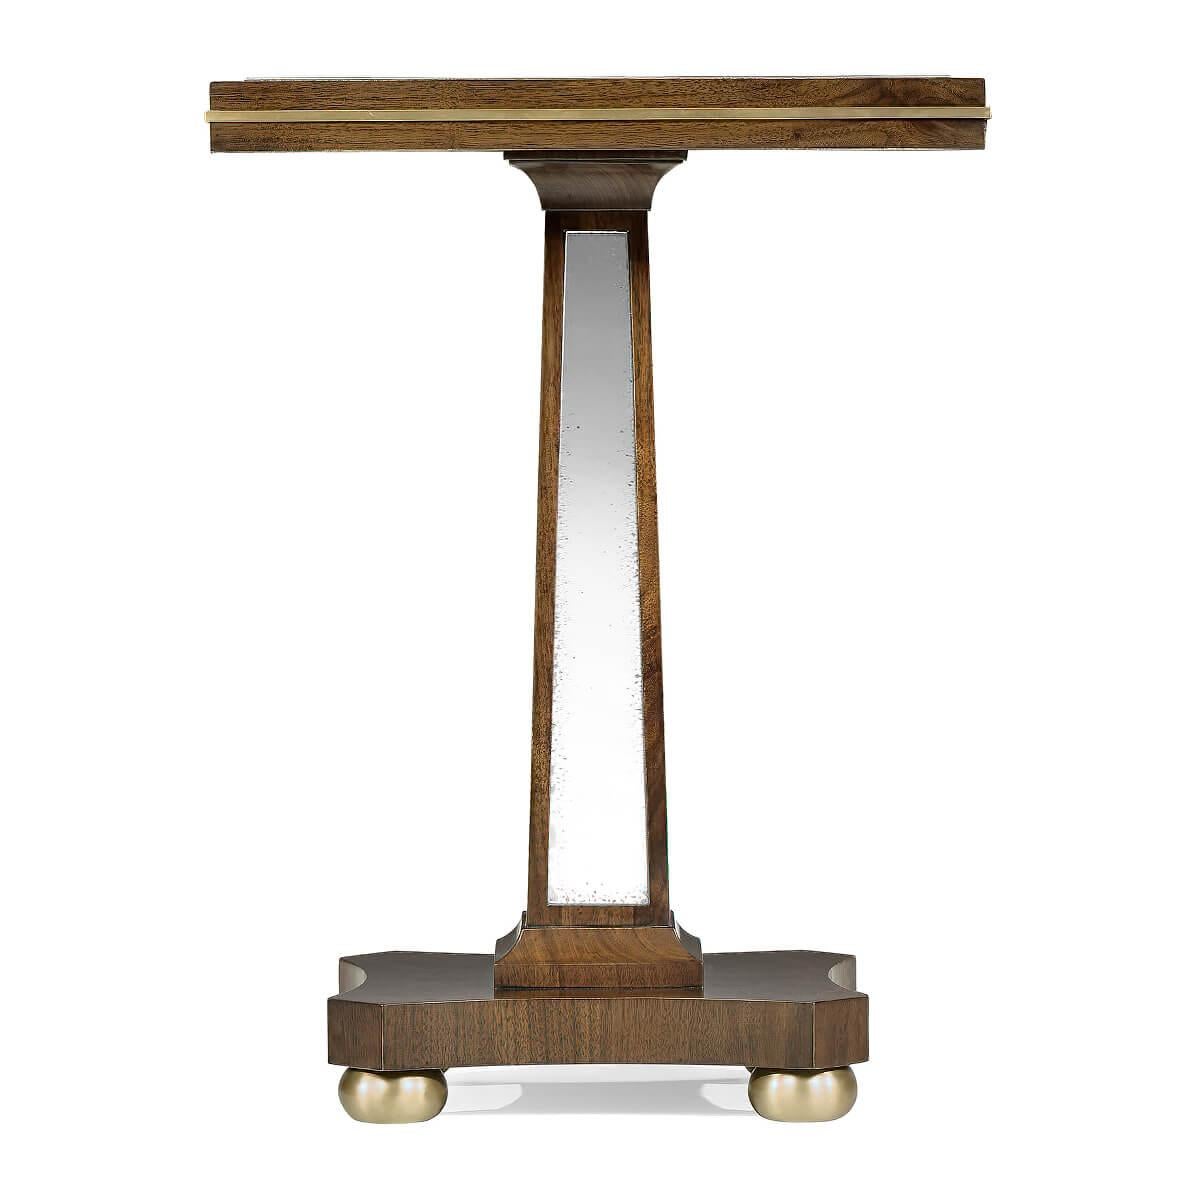 An Art Deco-inspired pedestal side table with an American walnut frame, antiqued mirror top, and panels pedestal sides with brass trim and hardware.

Dimensions: 17 1/8